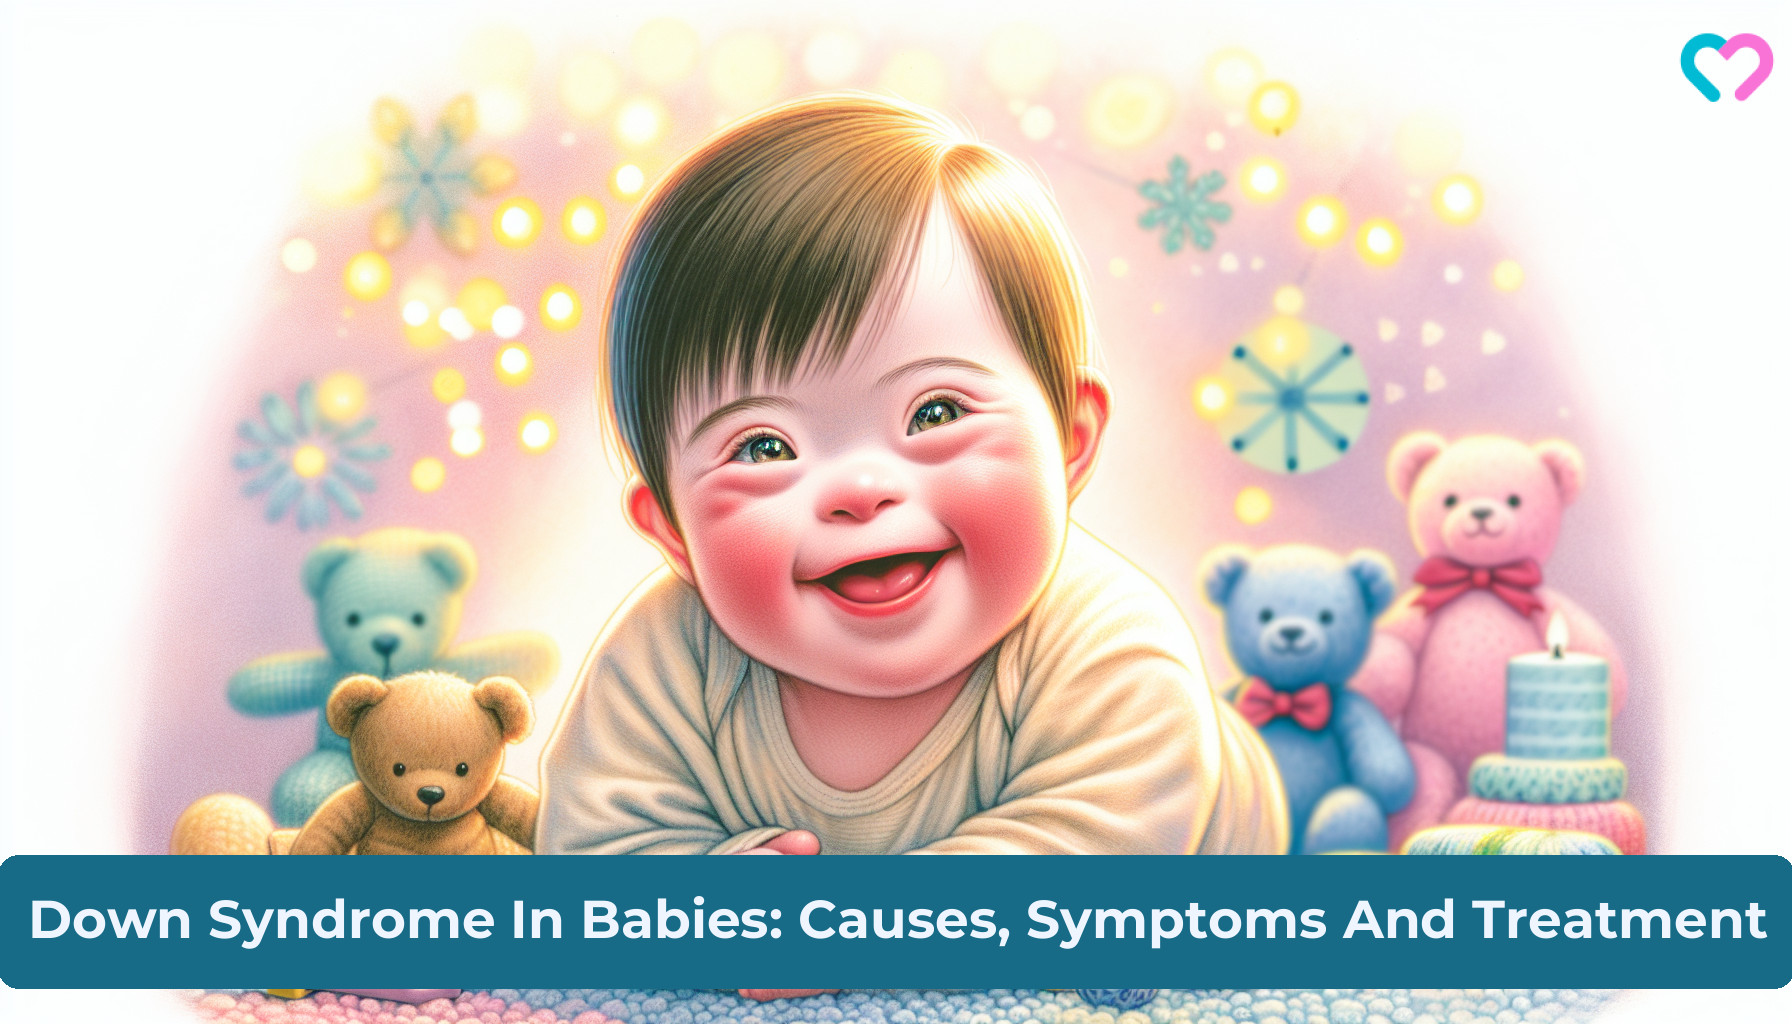 Down Syndrome In Babies_illustration